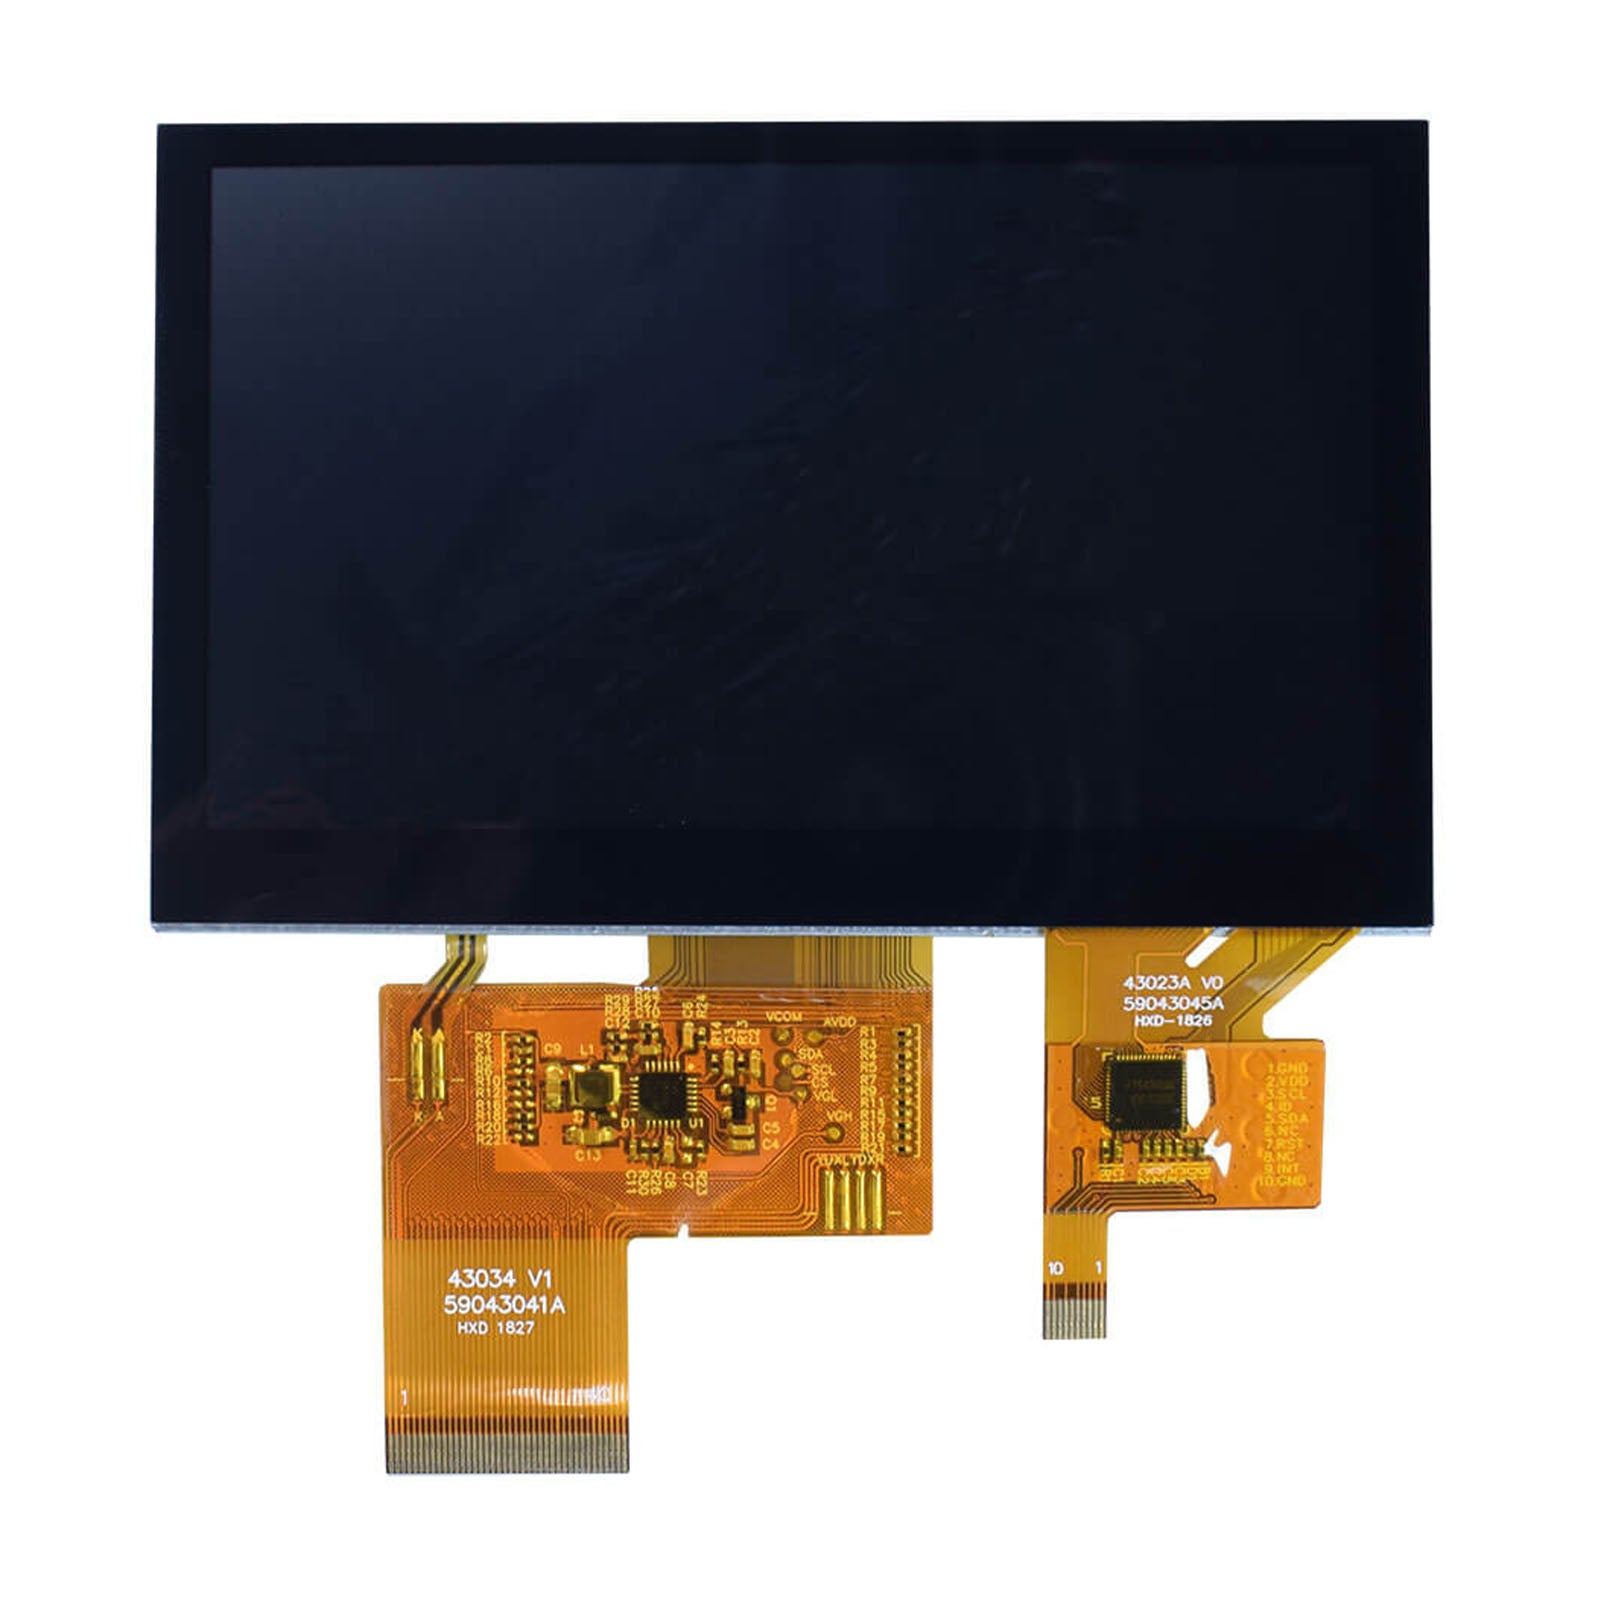 DisplayModule 4.3" IPS 800x480 Display Panel With Capacitive Touch - RGB